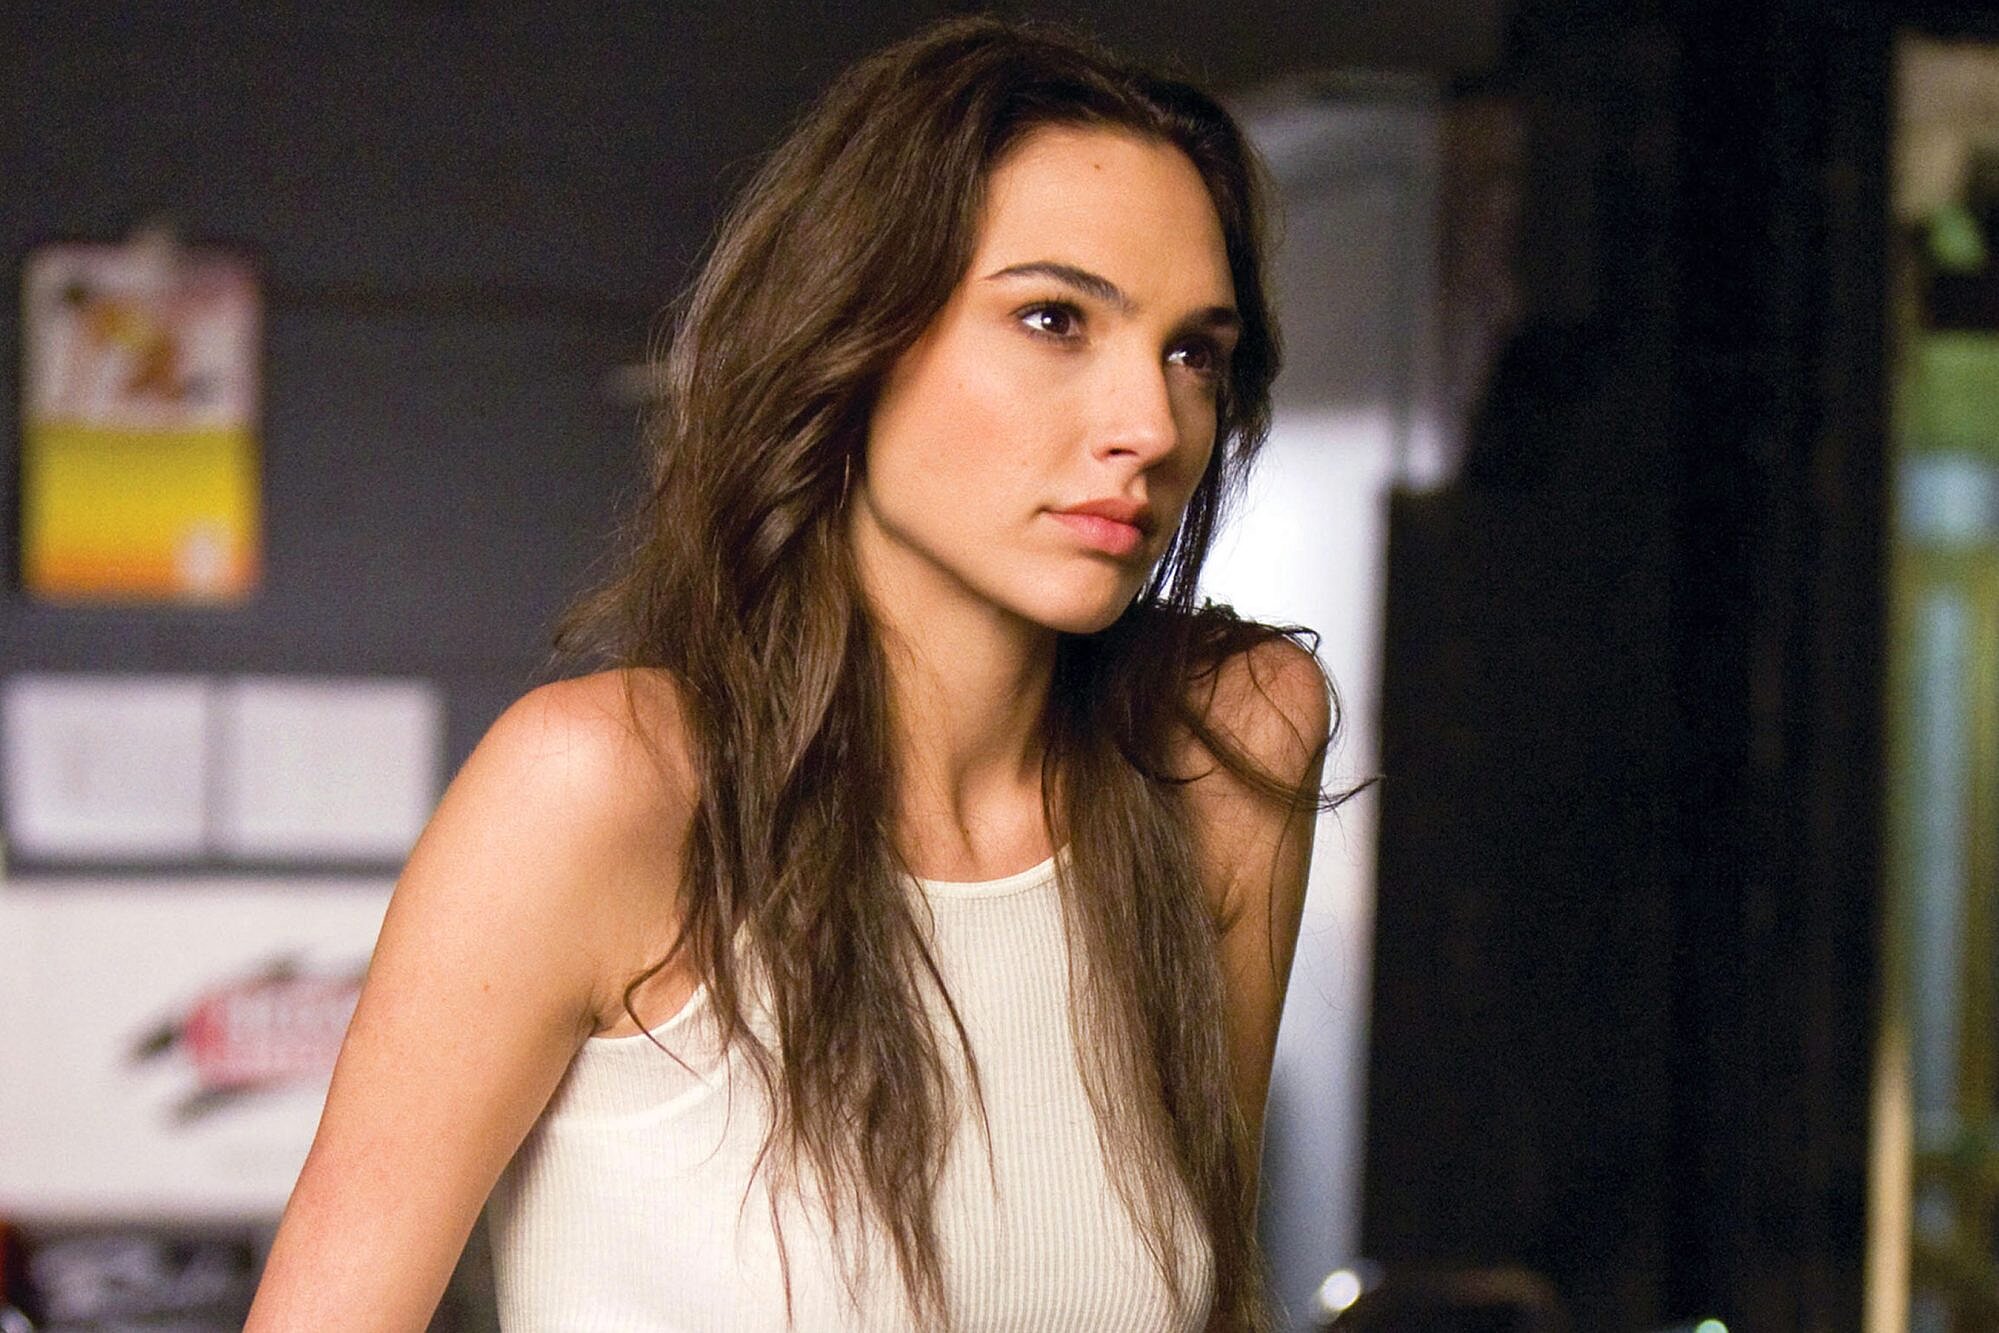 Gal Gadot - Check Out the Most Watched Movies of the Actress